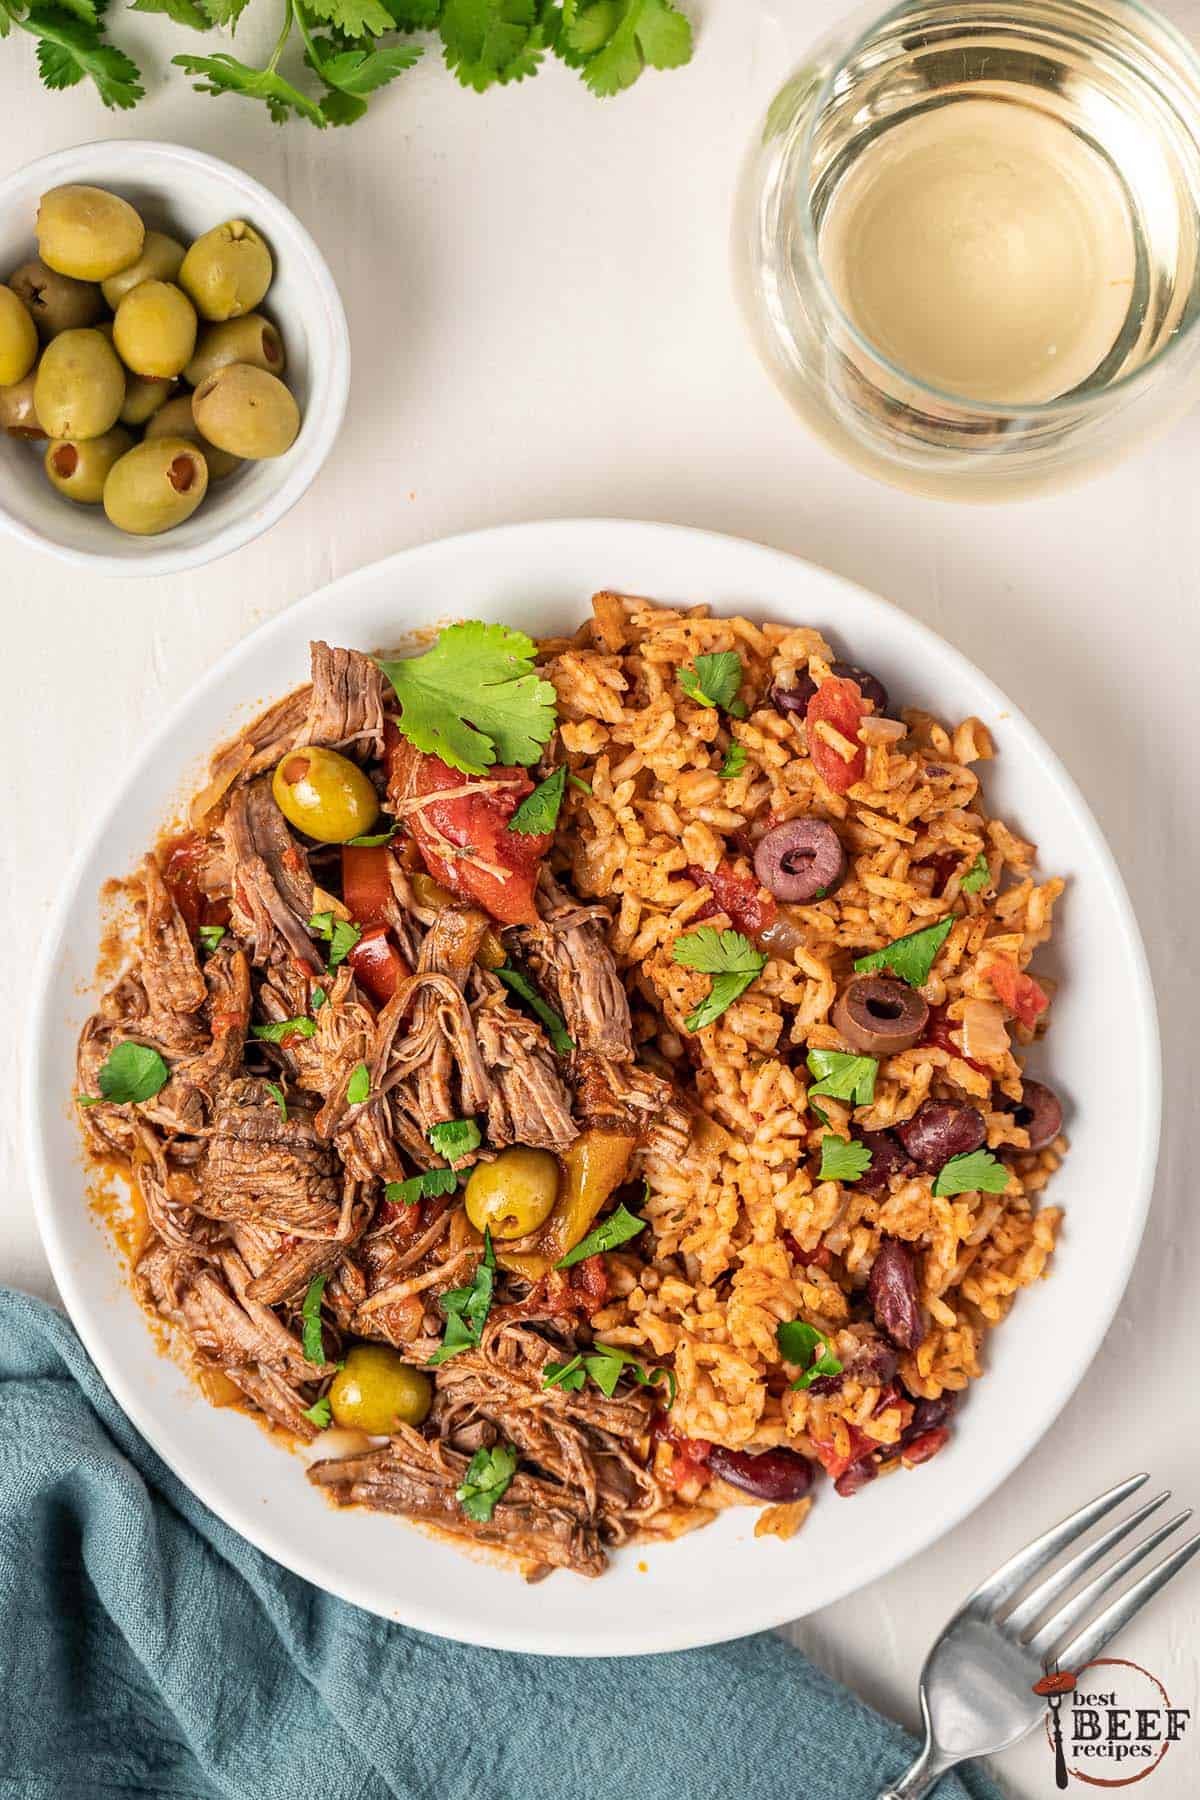 a dinner plate of ropa vieja and beans and rice with a cup of wine and a dish of olives